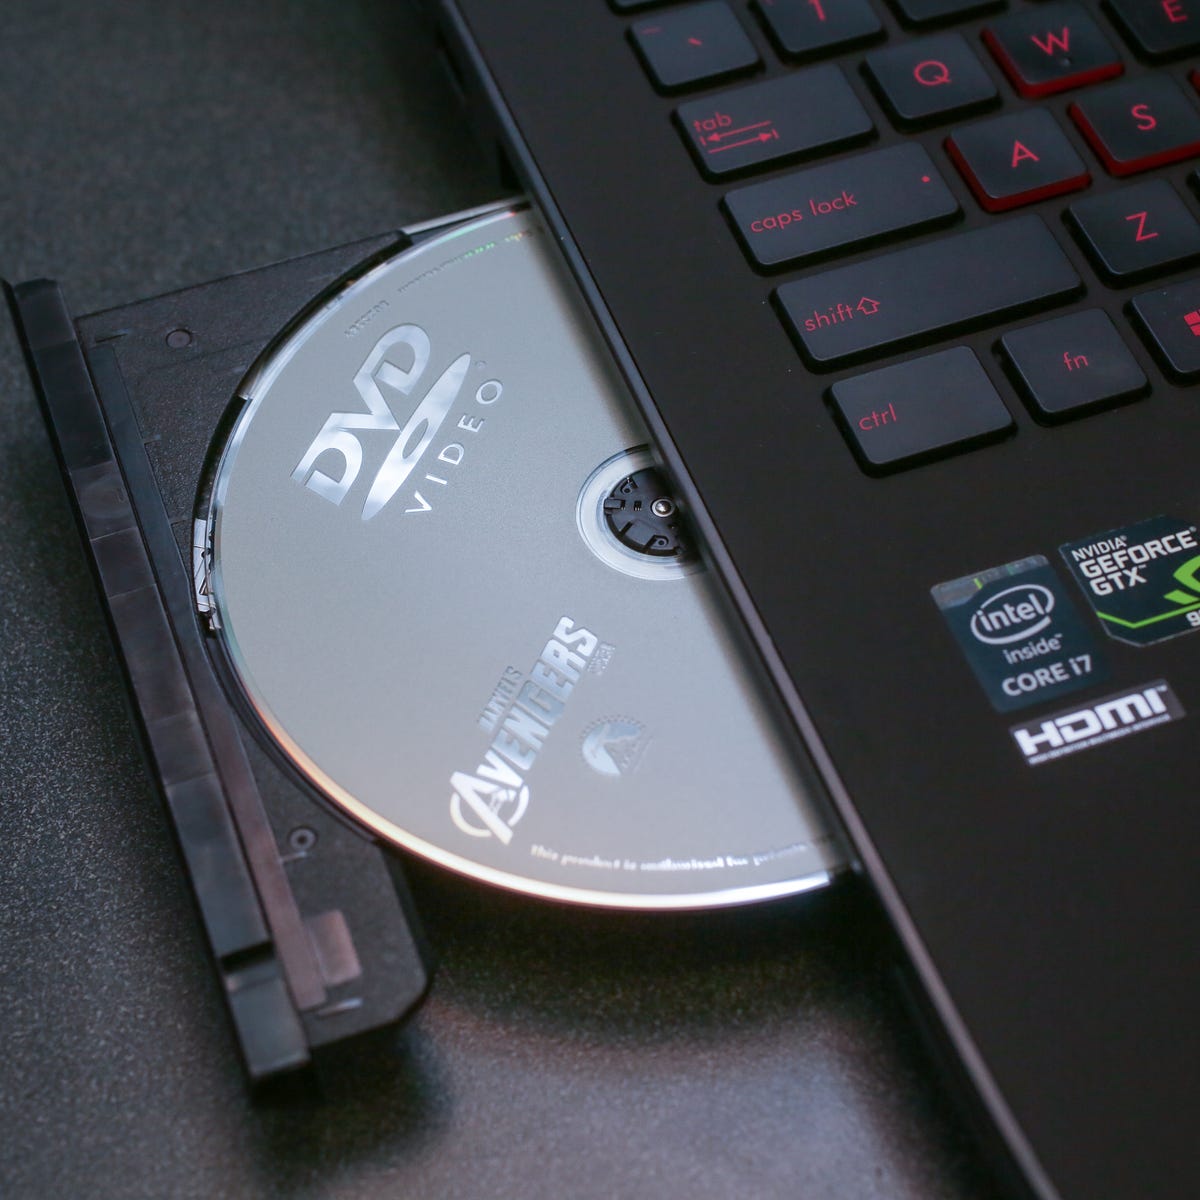 How to watch DVDs and Blu-rays for free in Windows 10 - CNET